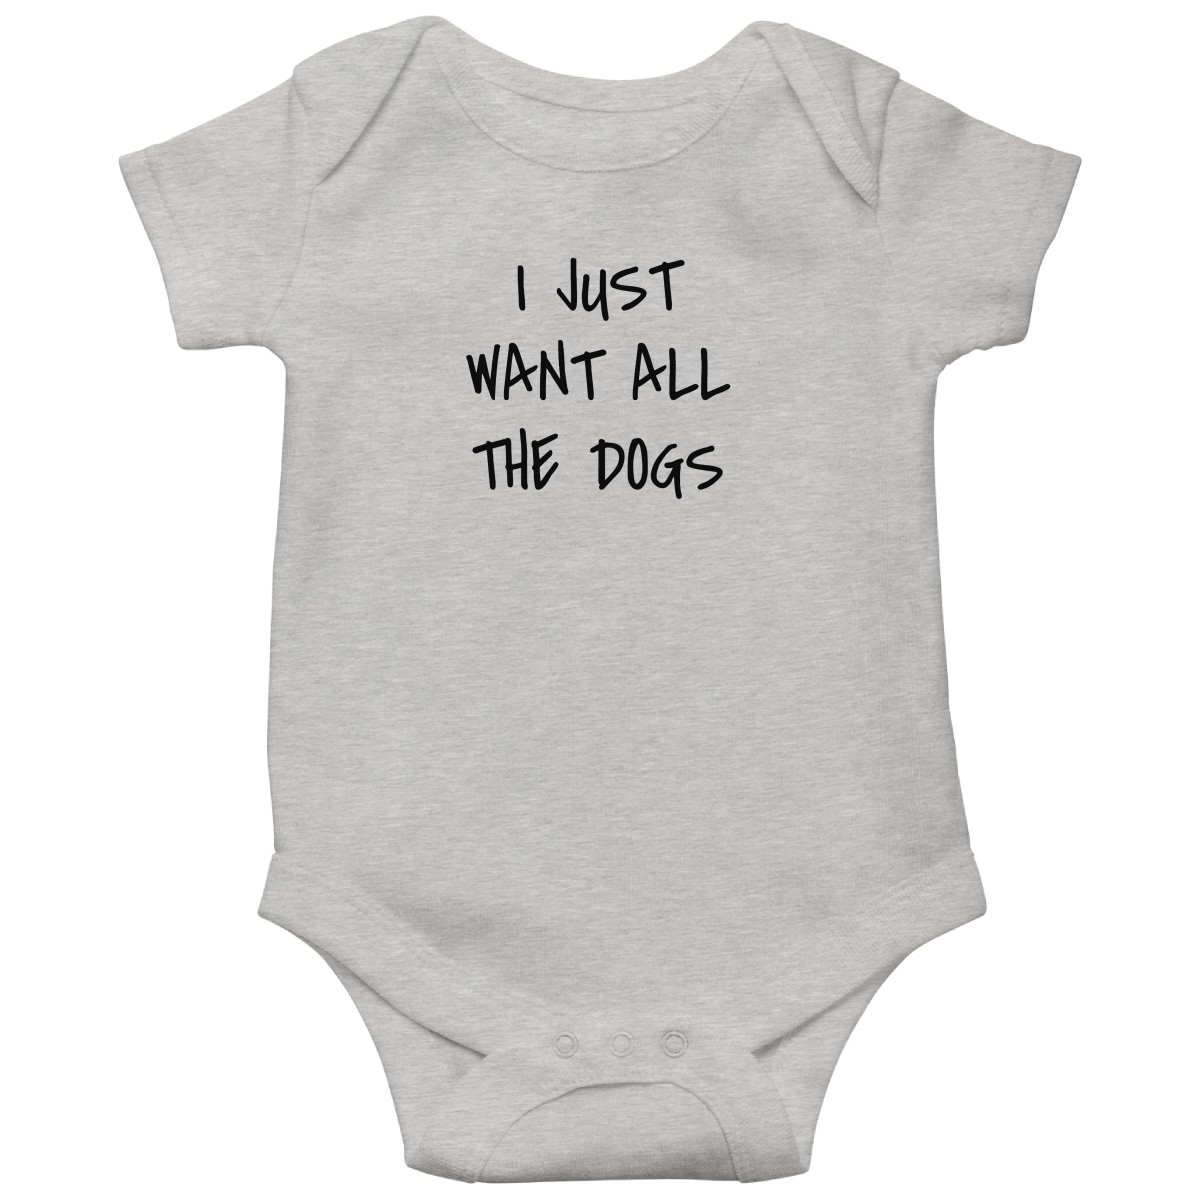 I Just Want All the Dogs Baby Bodysuits | Gray